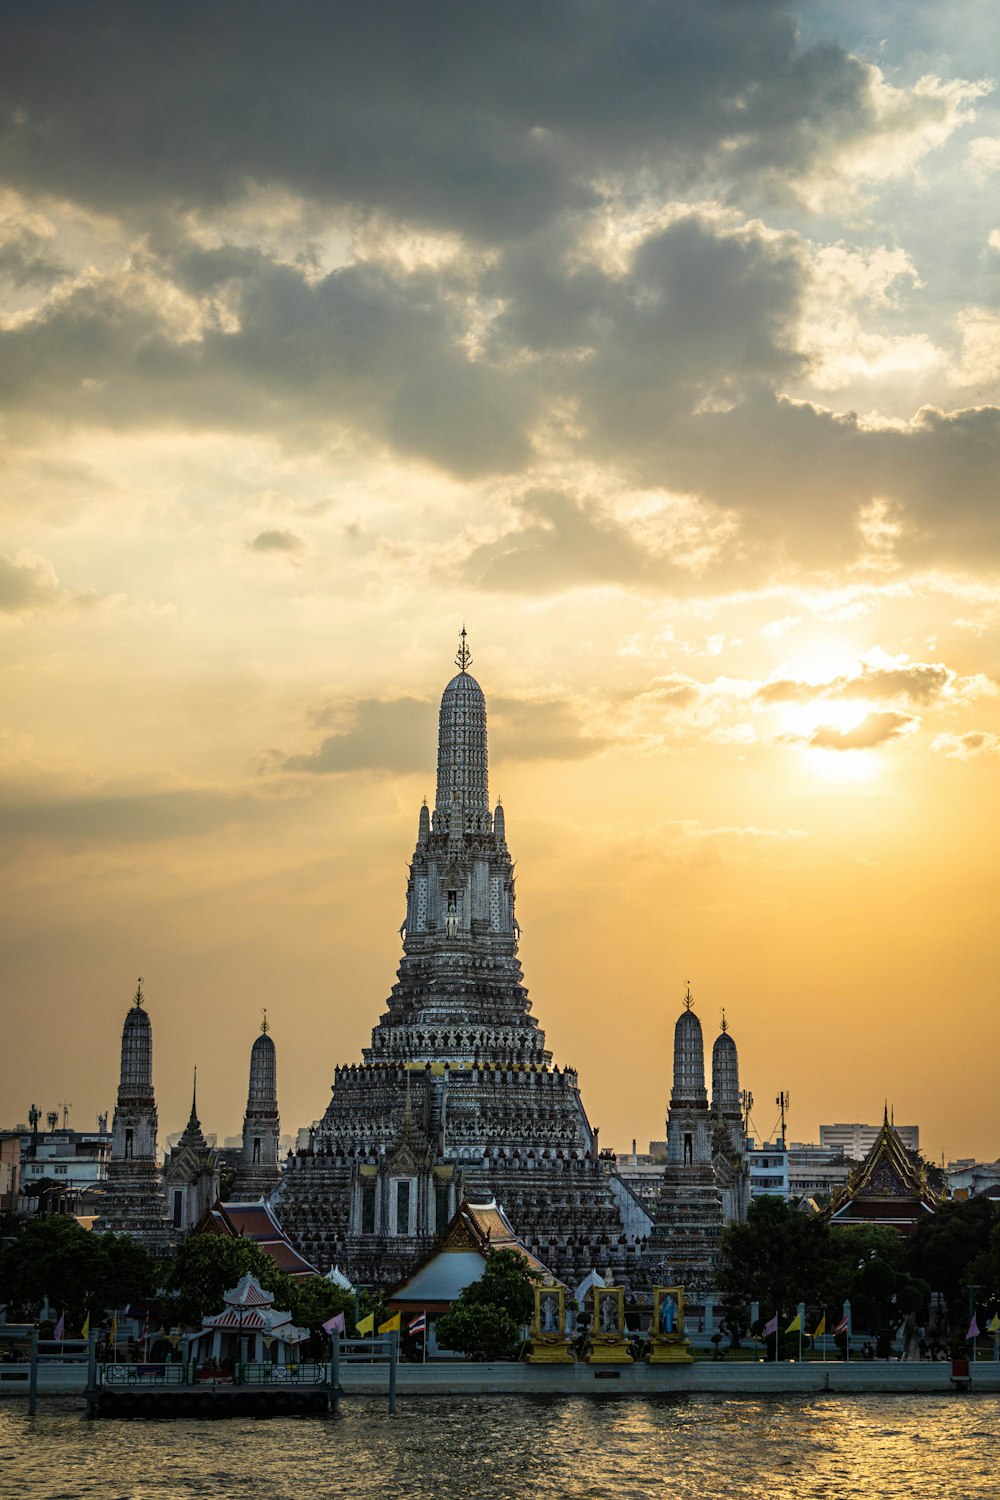 a large building with towers by a body of water with Wat Arun in the background